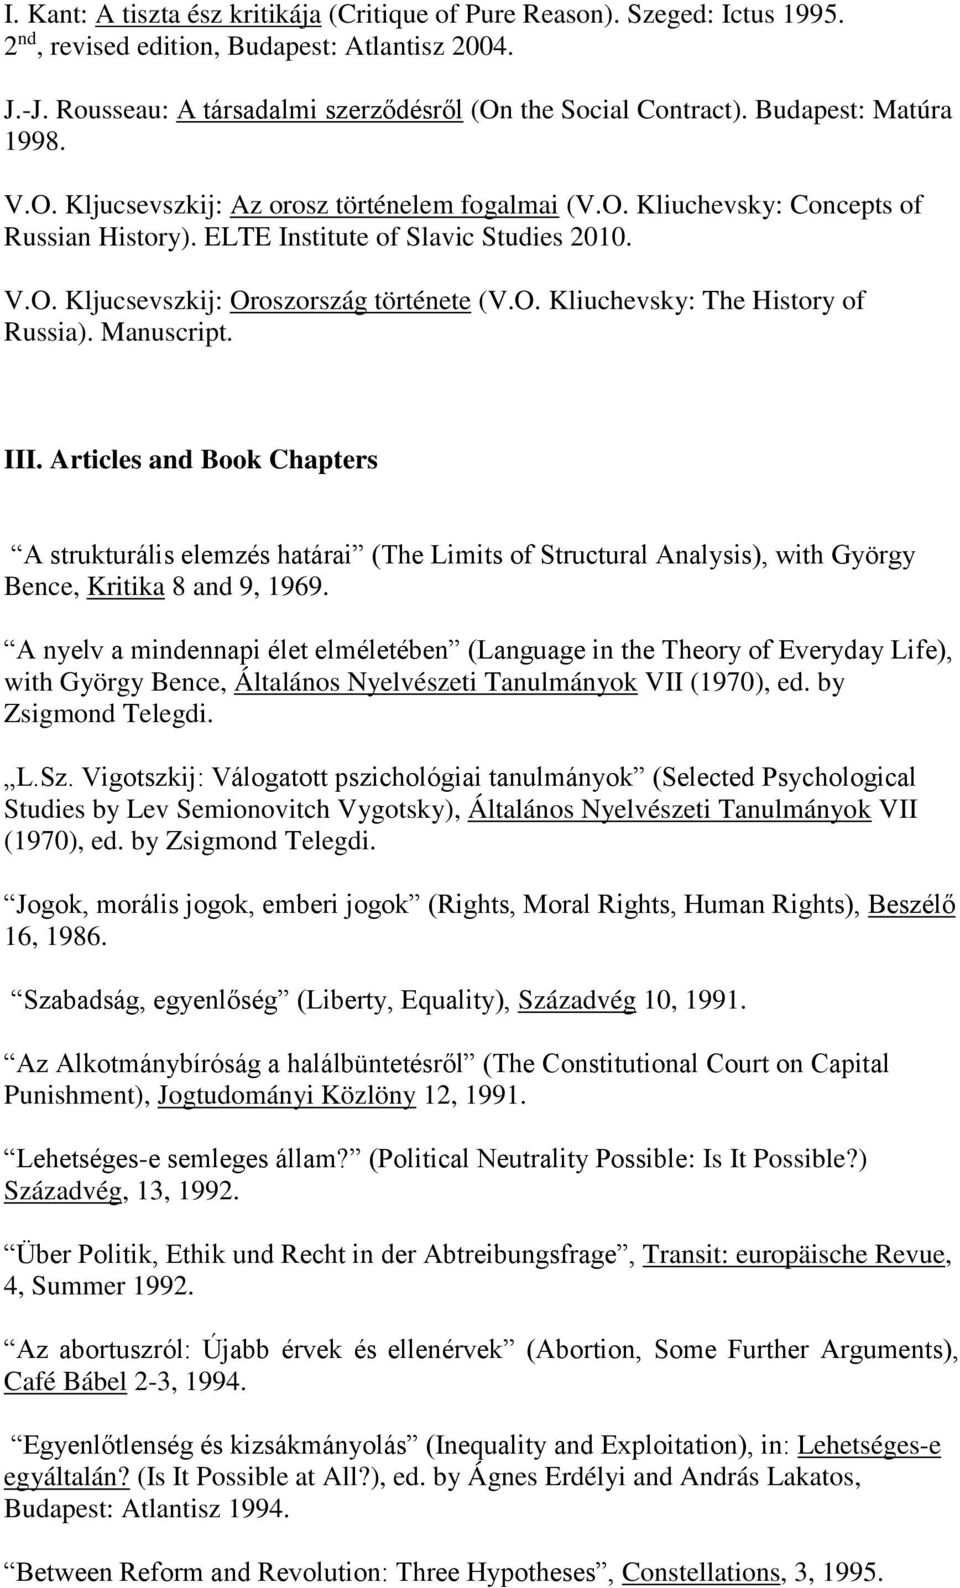 O. Kliuchevsky: The History of Russia). Manuscript. III. Articles and Book Chapters A strukturális elemzés határai (The Limits of Structural Analysis), with György Bence, Kritika 8 and 9, 1969.